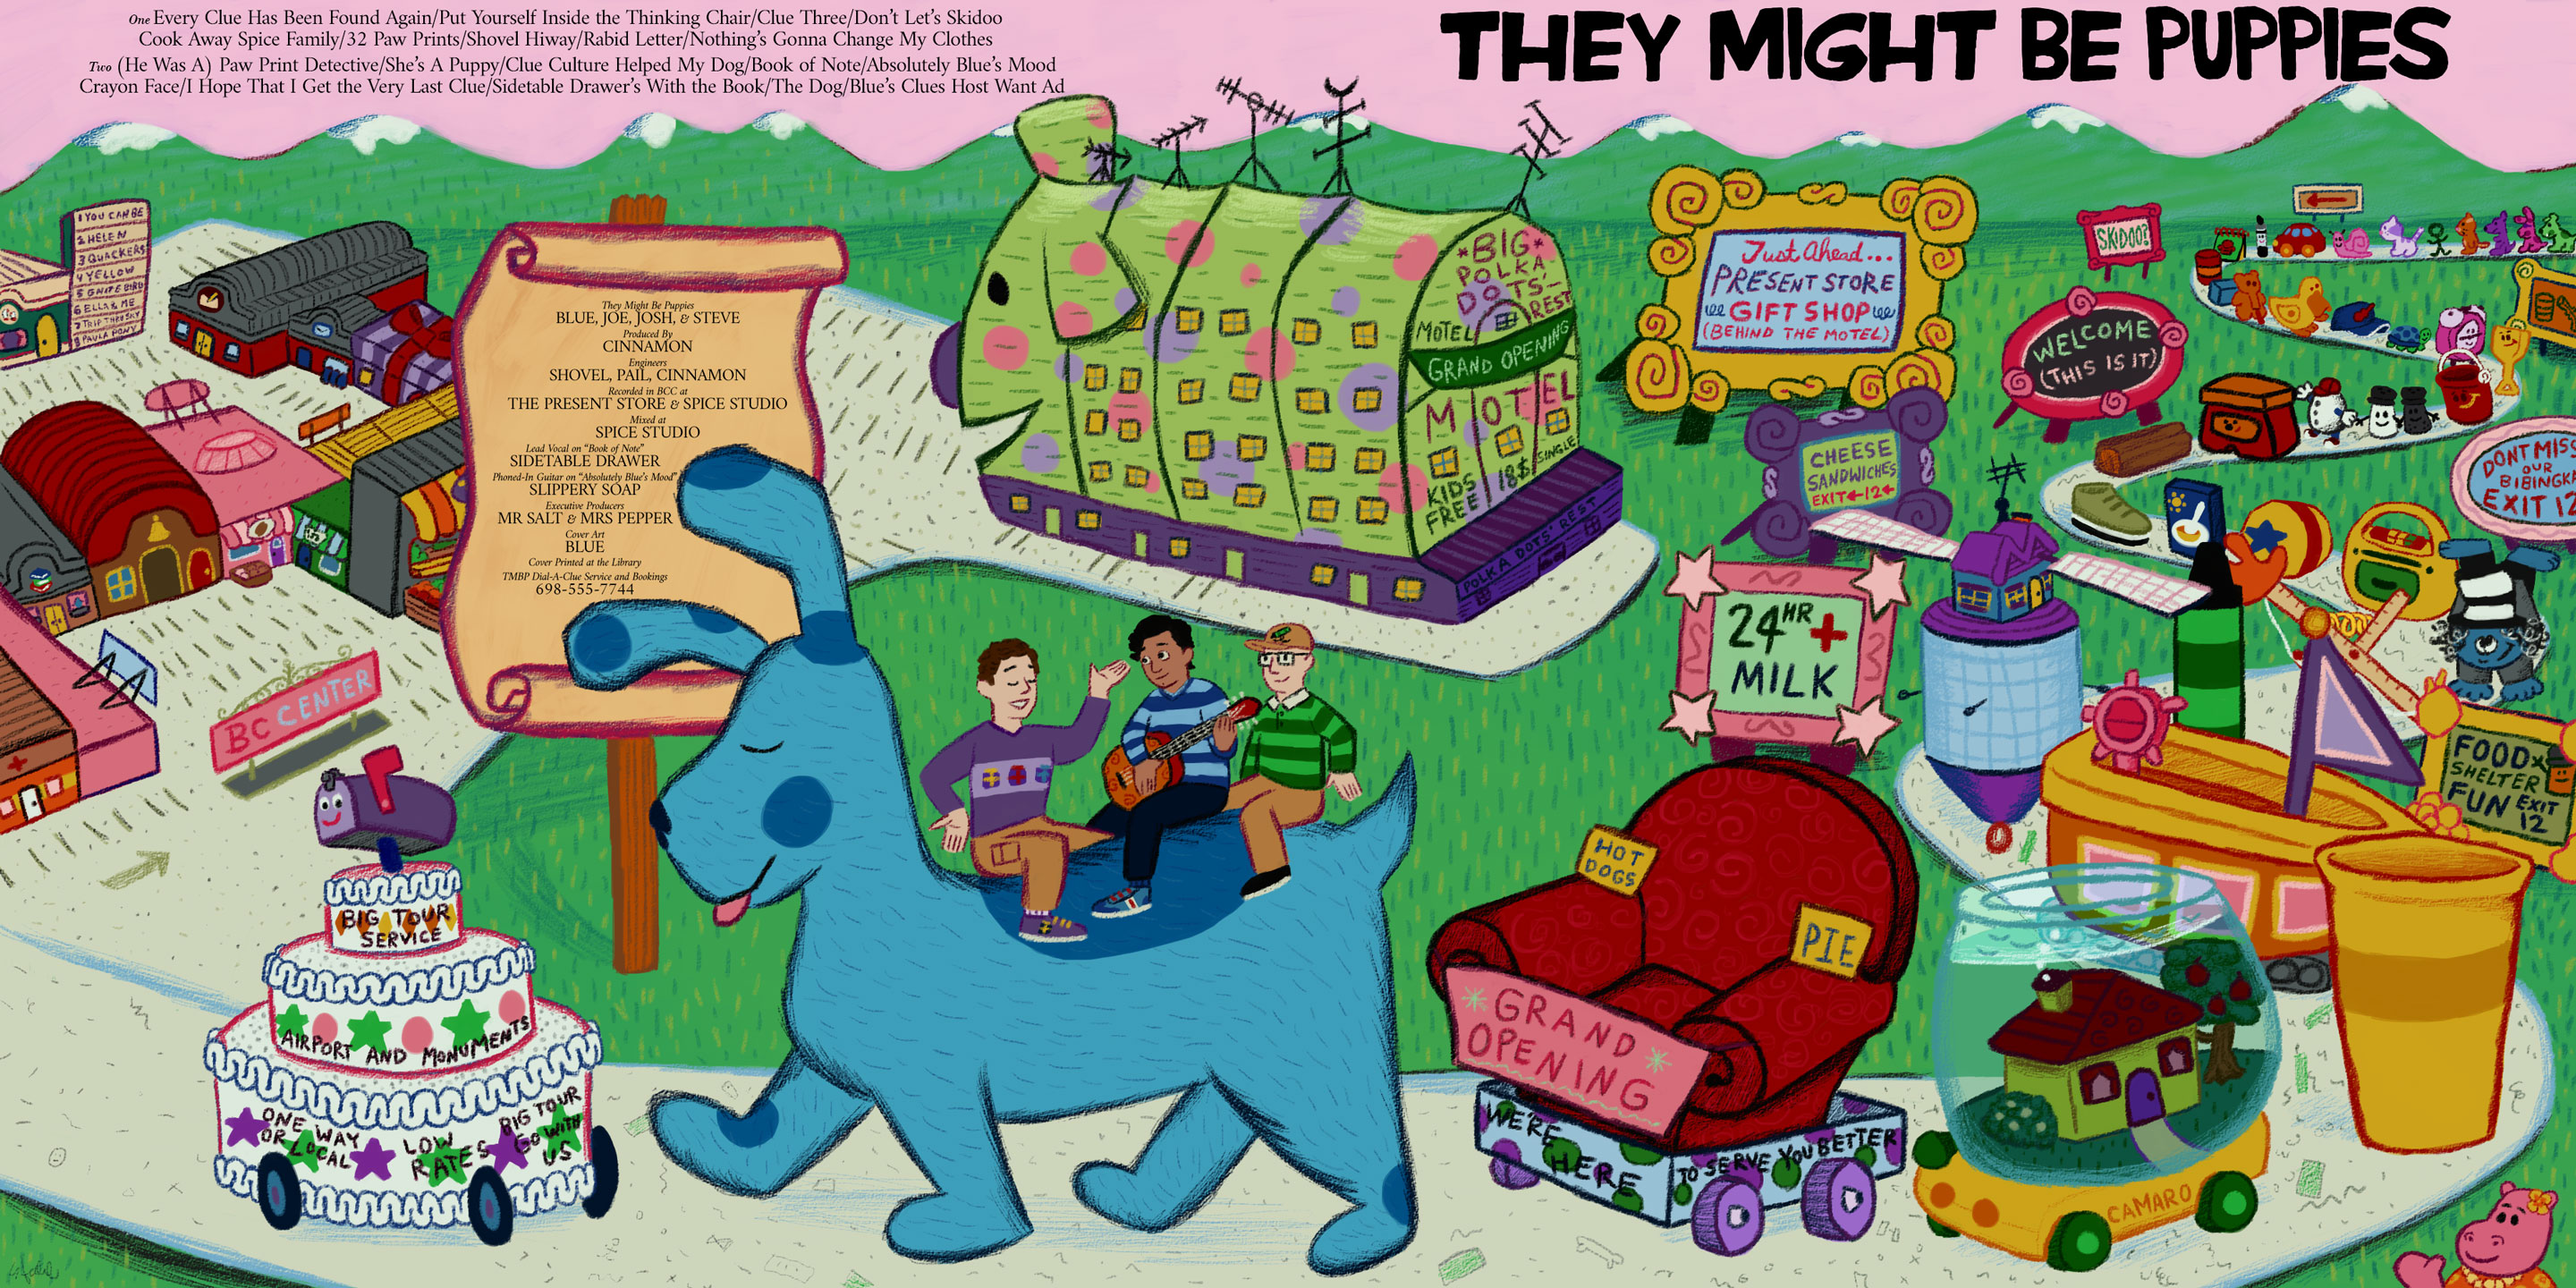 A digital drawing of They Might Be Giants' self titled album where everything is replaced with Blue's Clues references. There's a pink sky with the track listing and album title written in it with green hills below it. There's a shopping center in the top left with a signpost that have credits written on it to the right of it. There's a parade that spans from the right to the left. There's a motel that looks like Polka Dots located in the top middle of the piece.